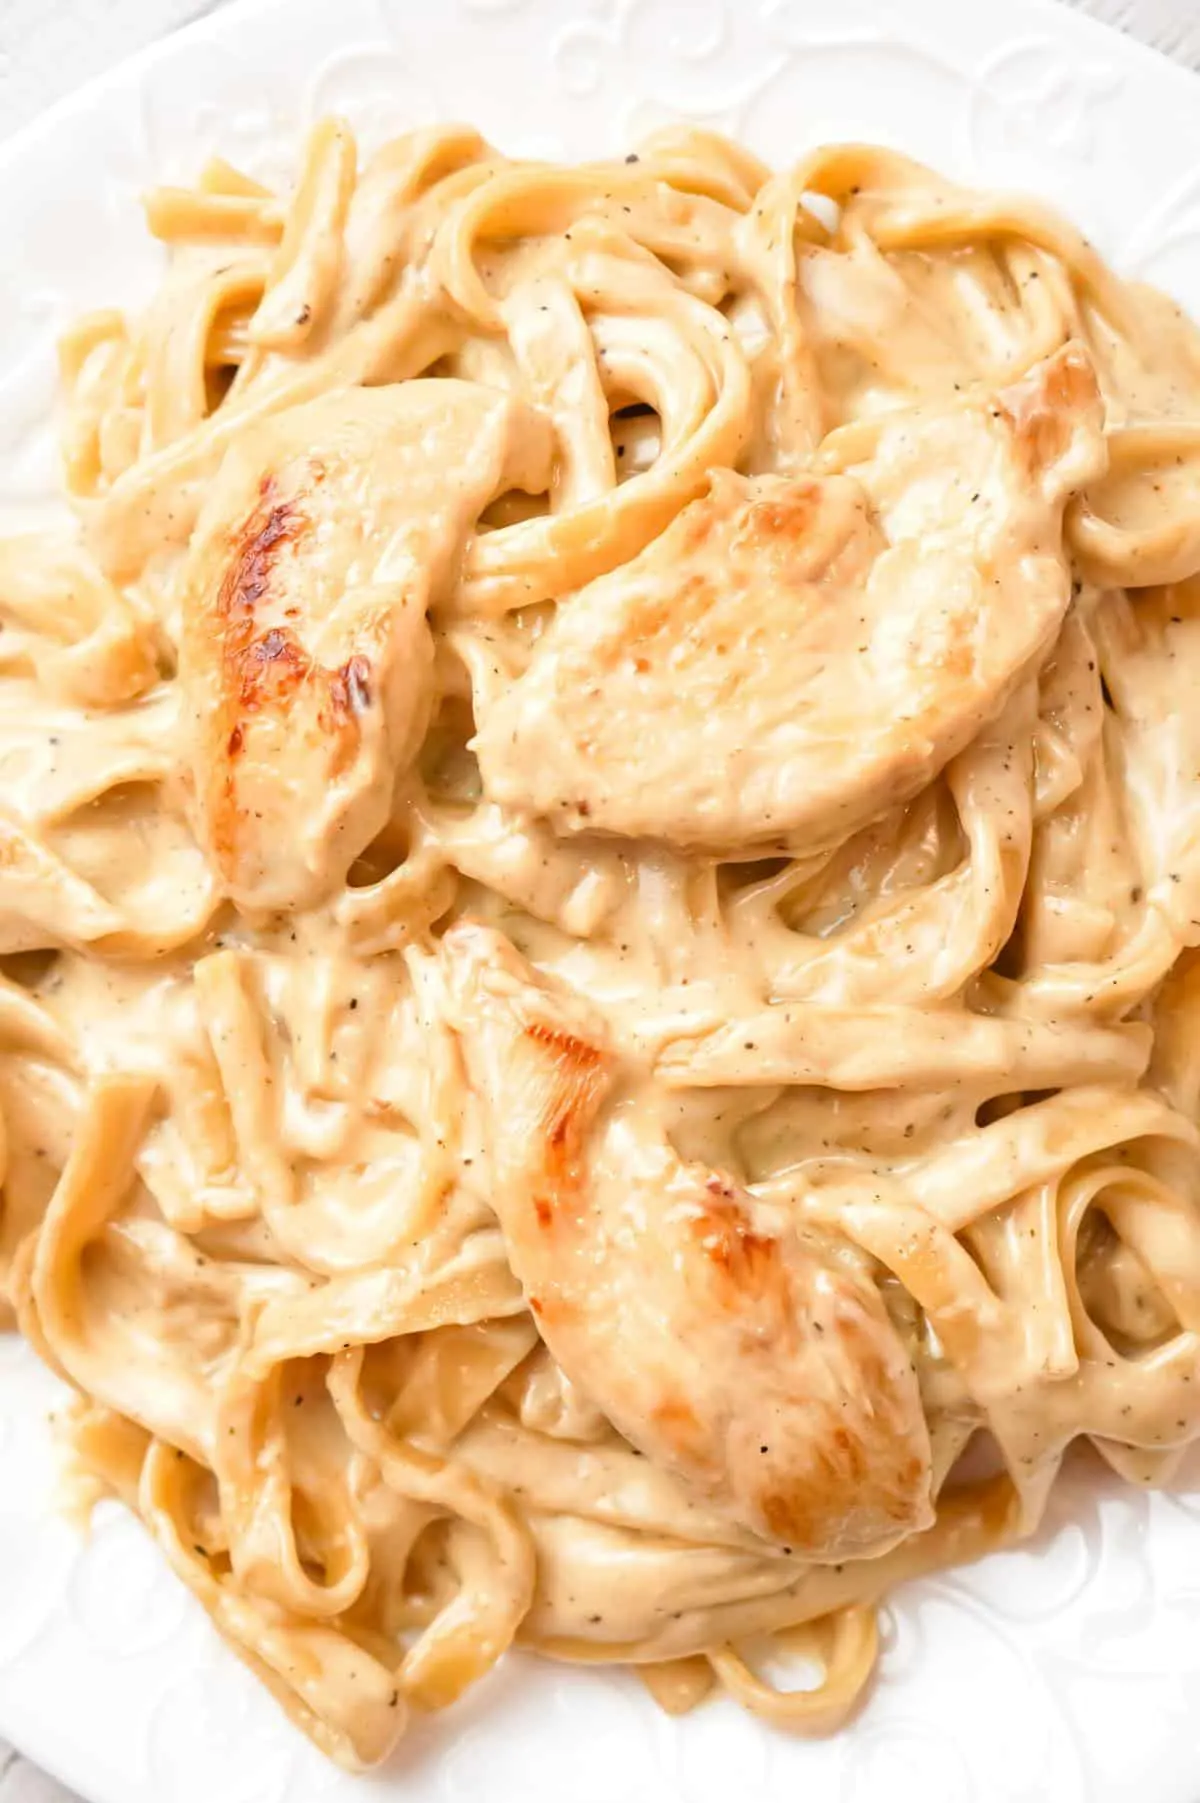 One Pot Fettuccine Alfredo with Chicken is an easy and delicious pasta recipe with a creamy garlic Parmesan sauce and loaded with slices of chicken breast.